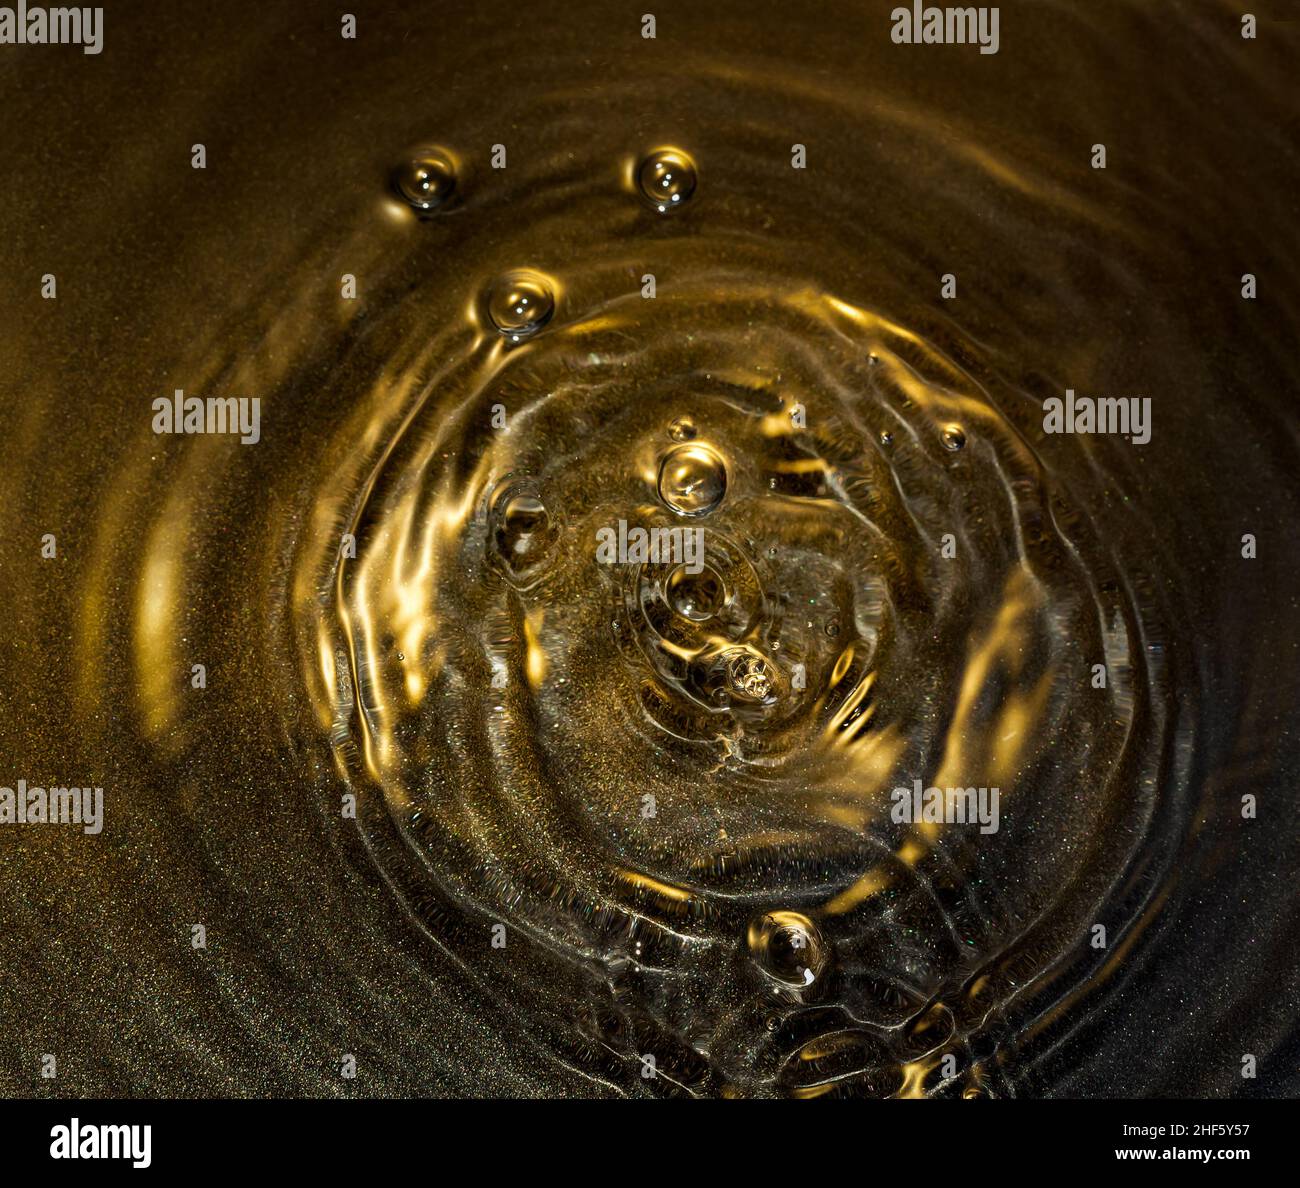 Gold background with water rings Stock Photo